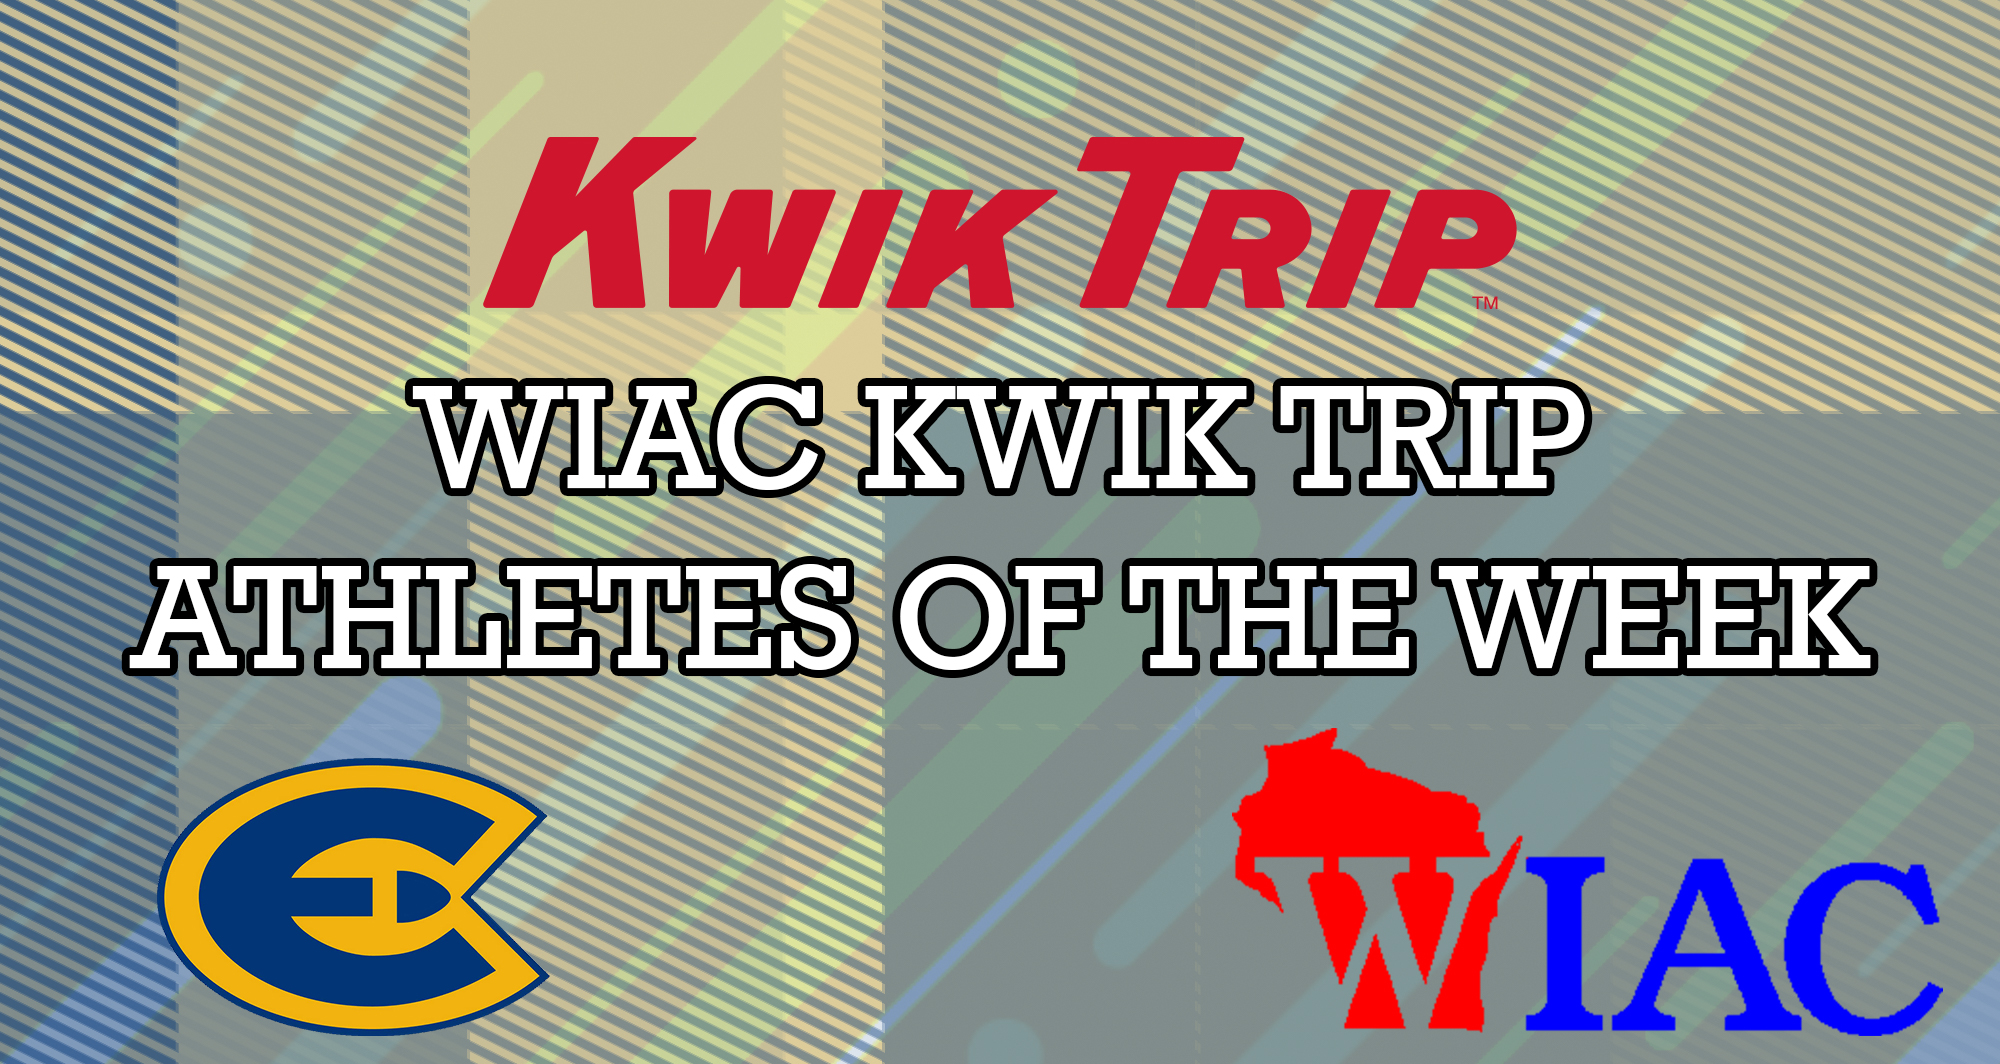 Four Blugolds Named Kwik Trip Athletes of the Week